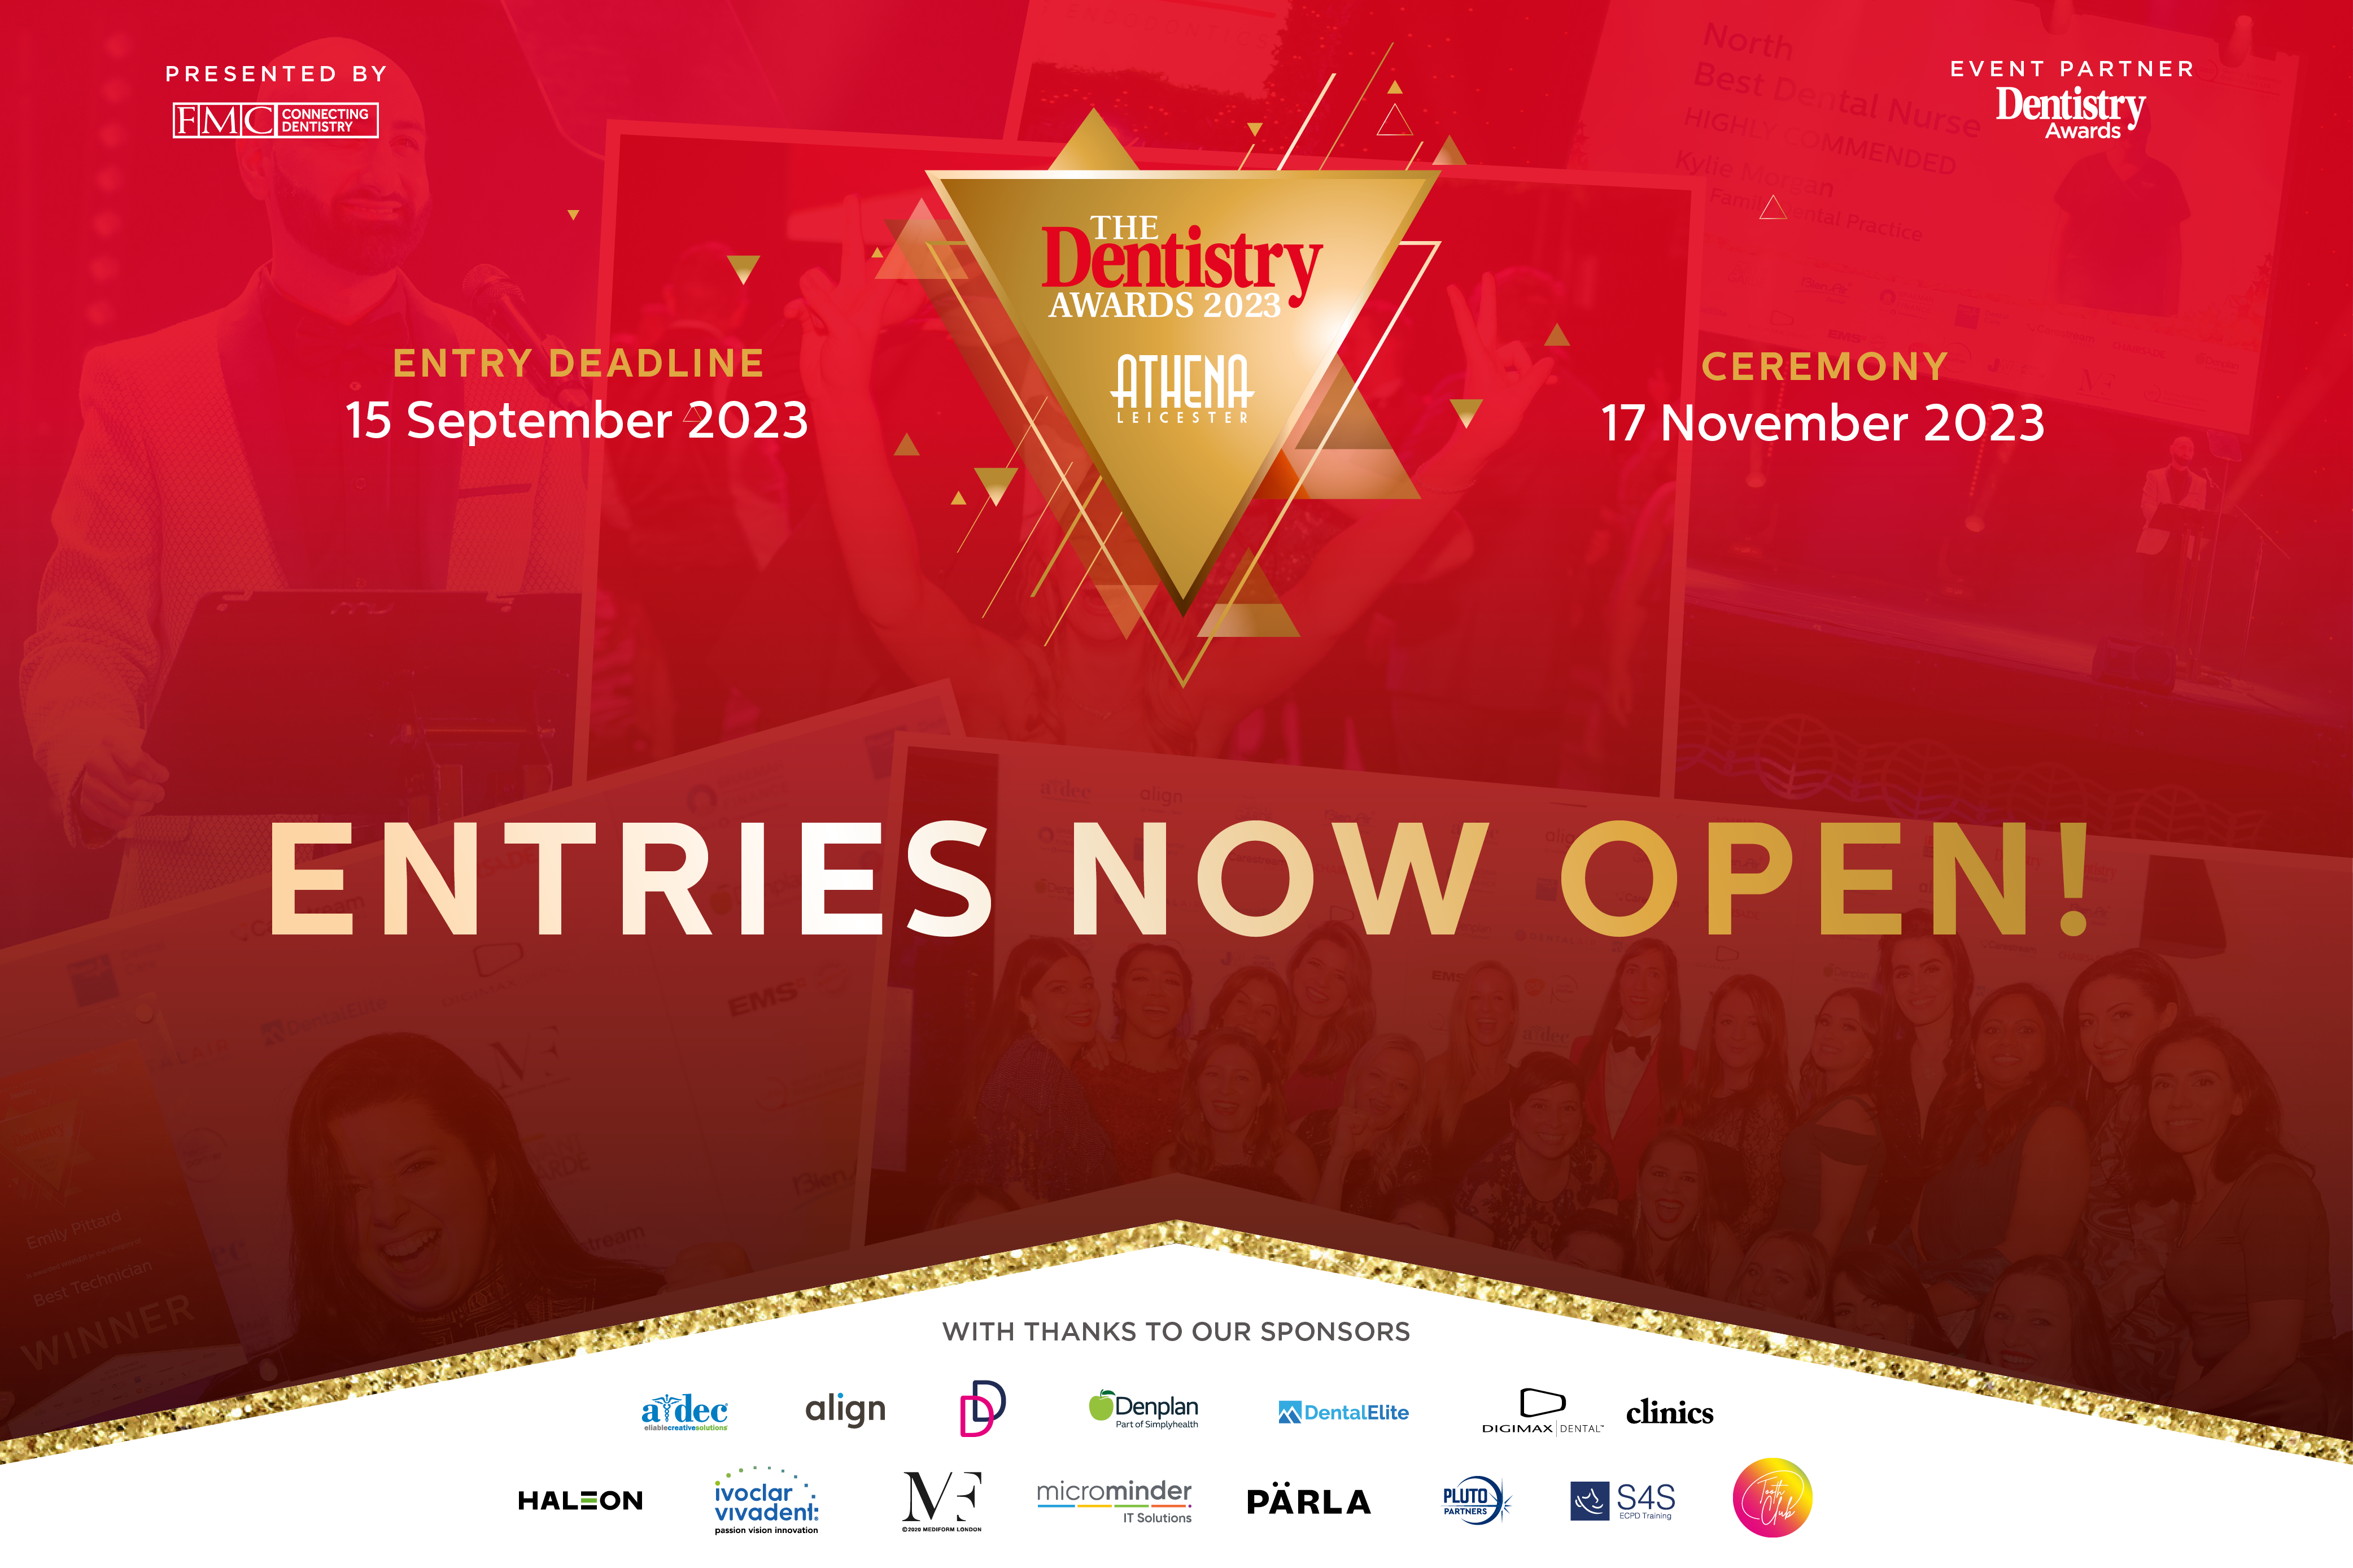 With entry for the 2023 Dentistry Awards now open, here's everything you need to know to compile and submit your entry.